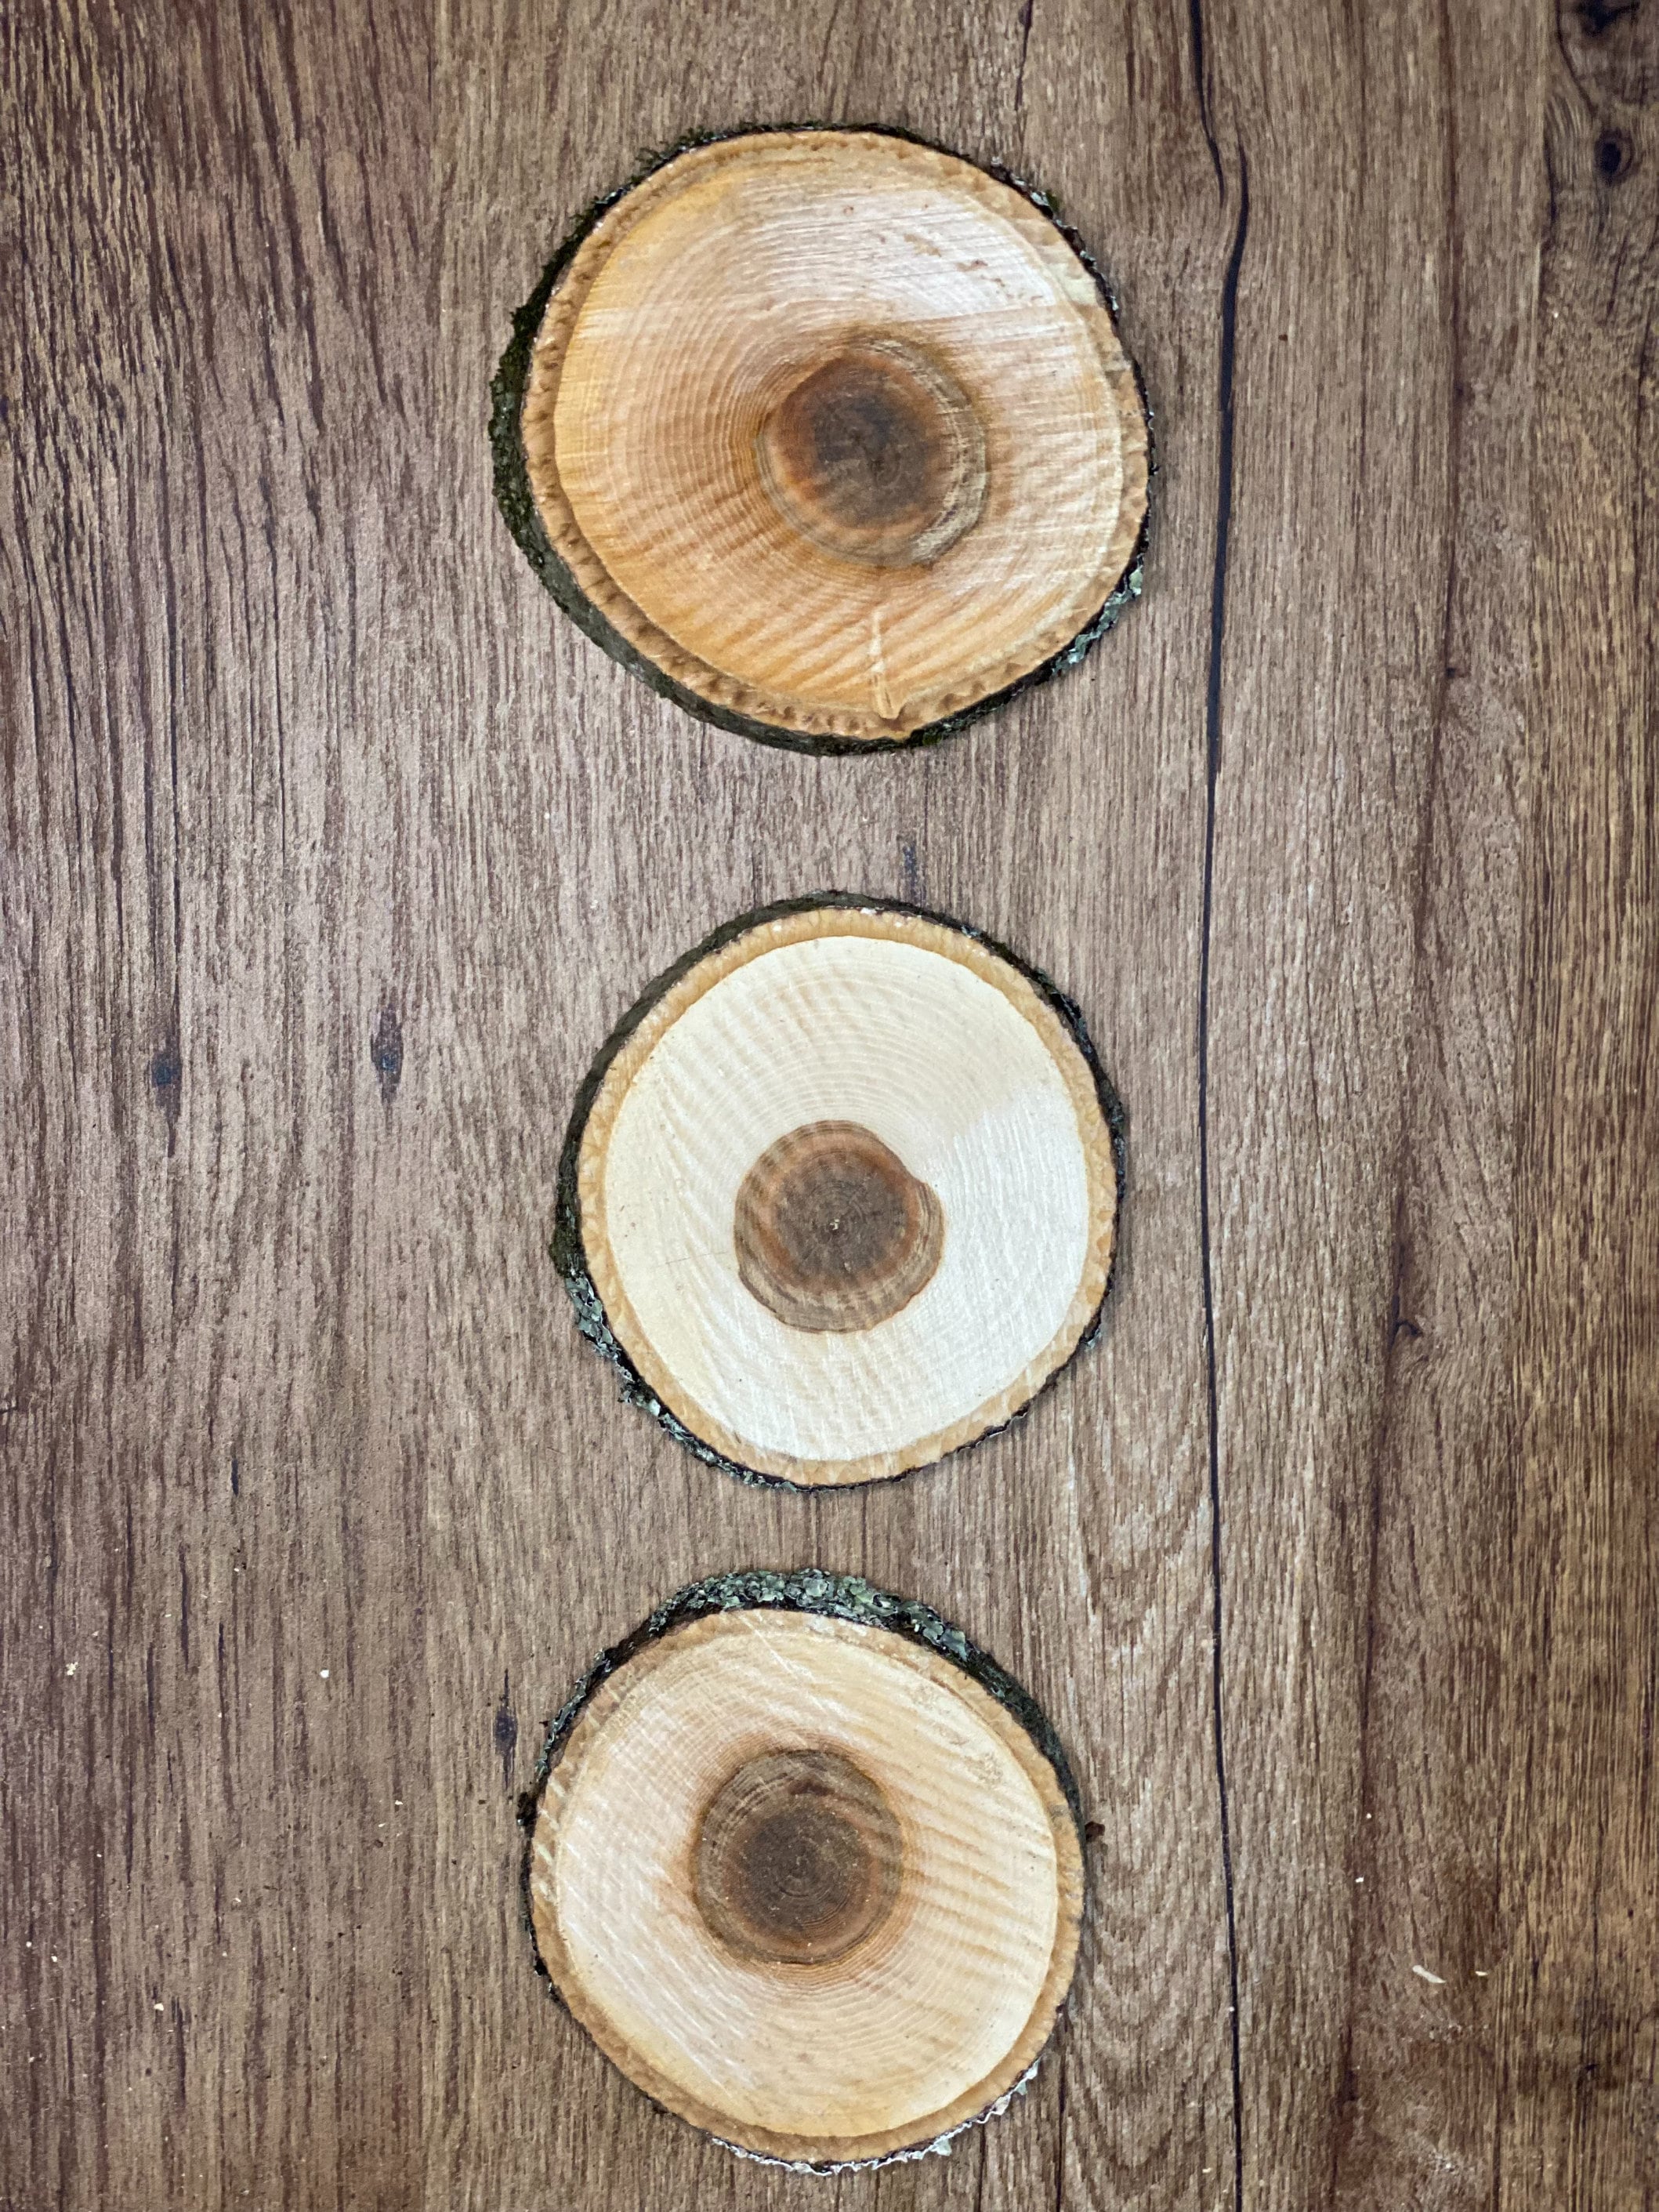 Three Hickory Wood Slices, Approximately 4-4.5 Inches in Length by 4 Inches Wide and 1/2 Inch Thick